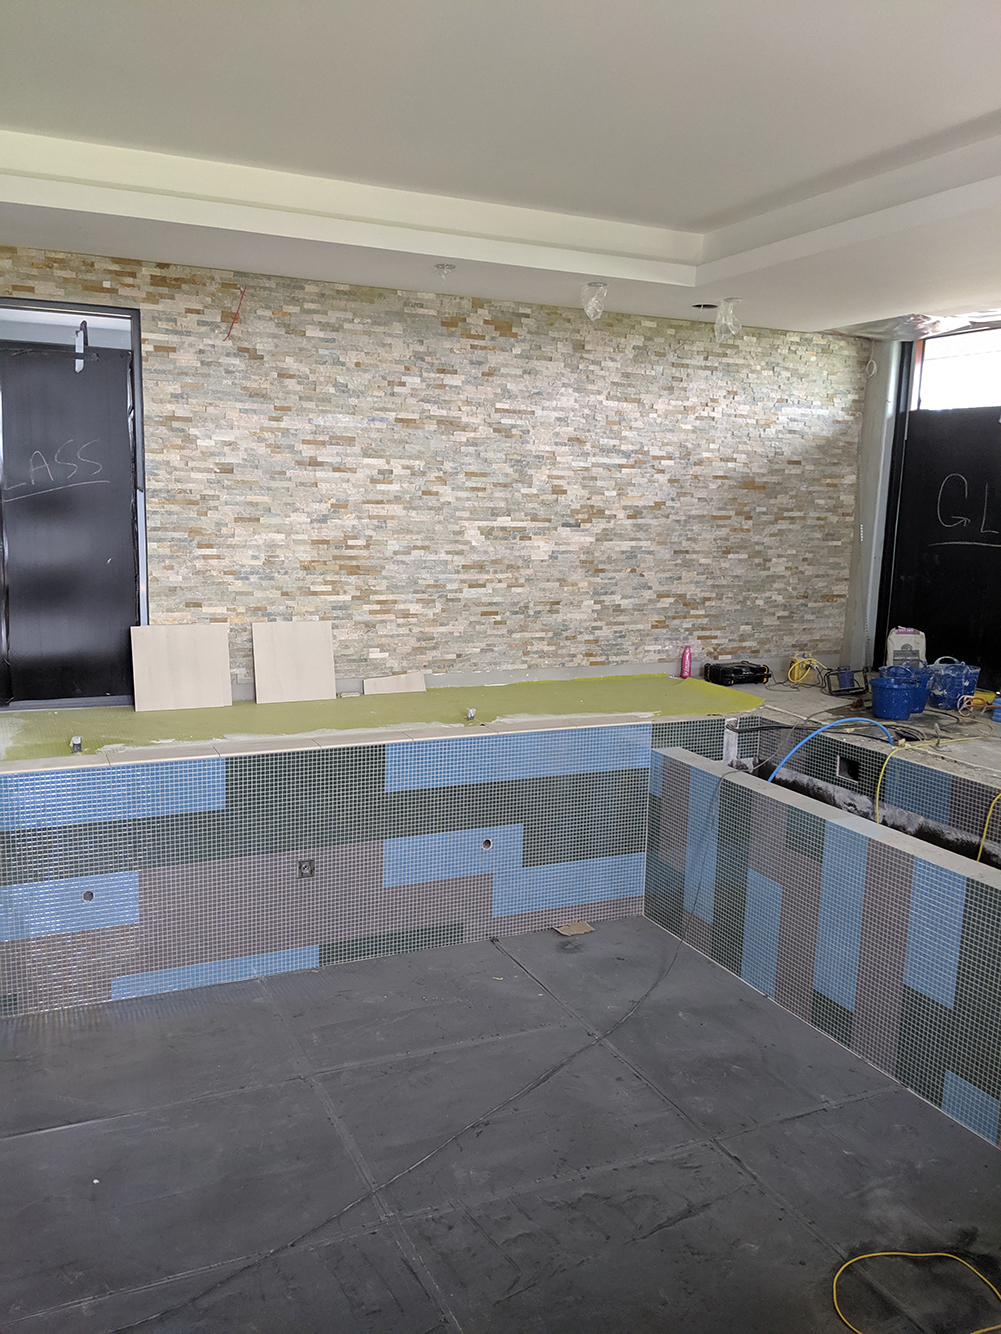 A photo showing the split face tile on the wall, with the pool and floor tiles with it.